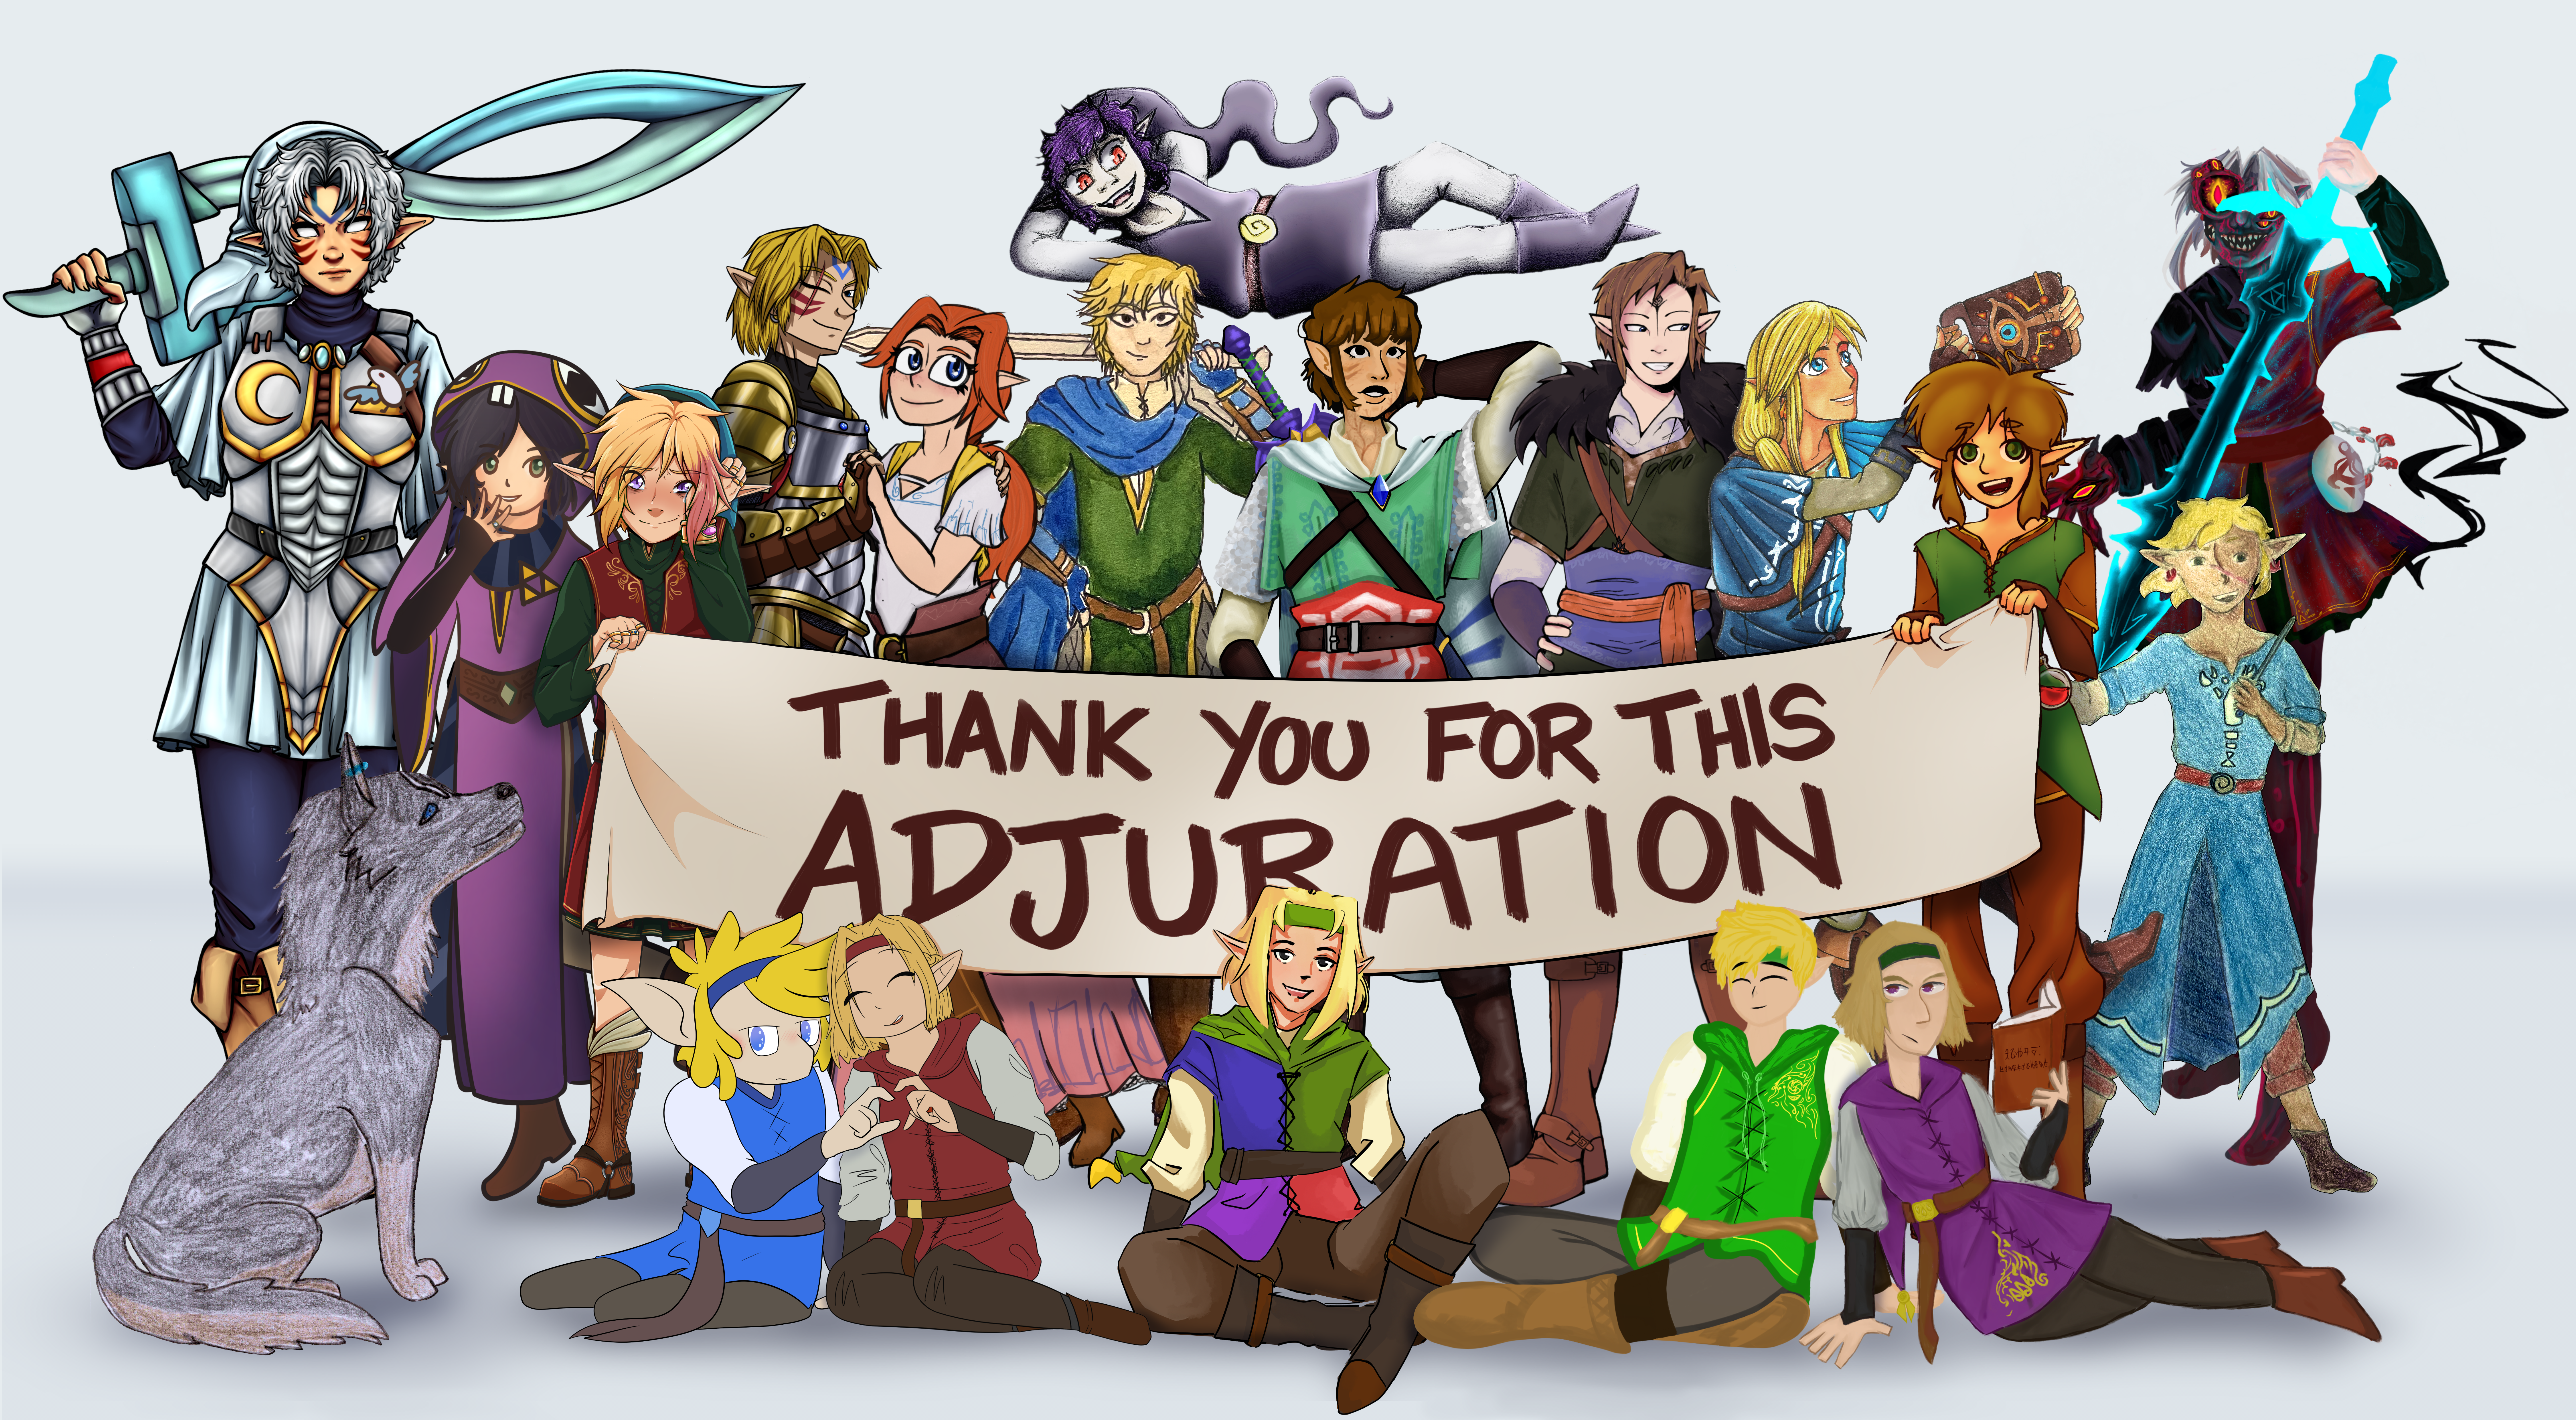 Drawing of all main characters from This is an Adjuration, all around a banner which reads "Thank you for this Adjuration!